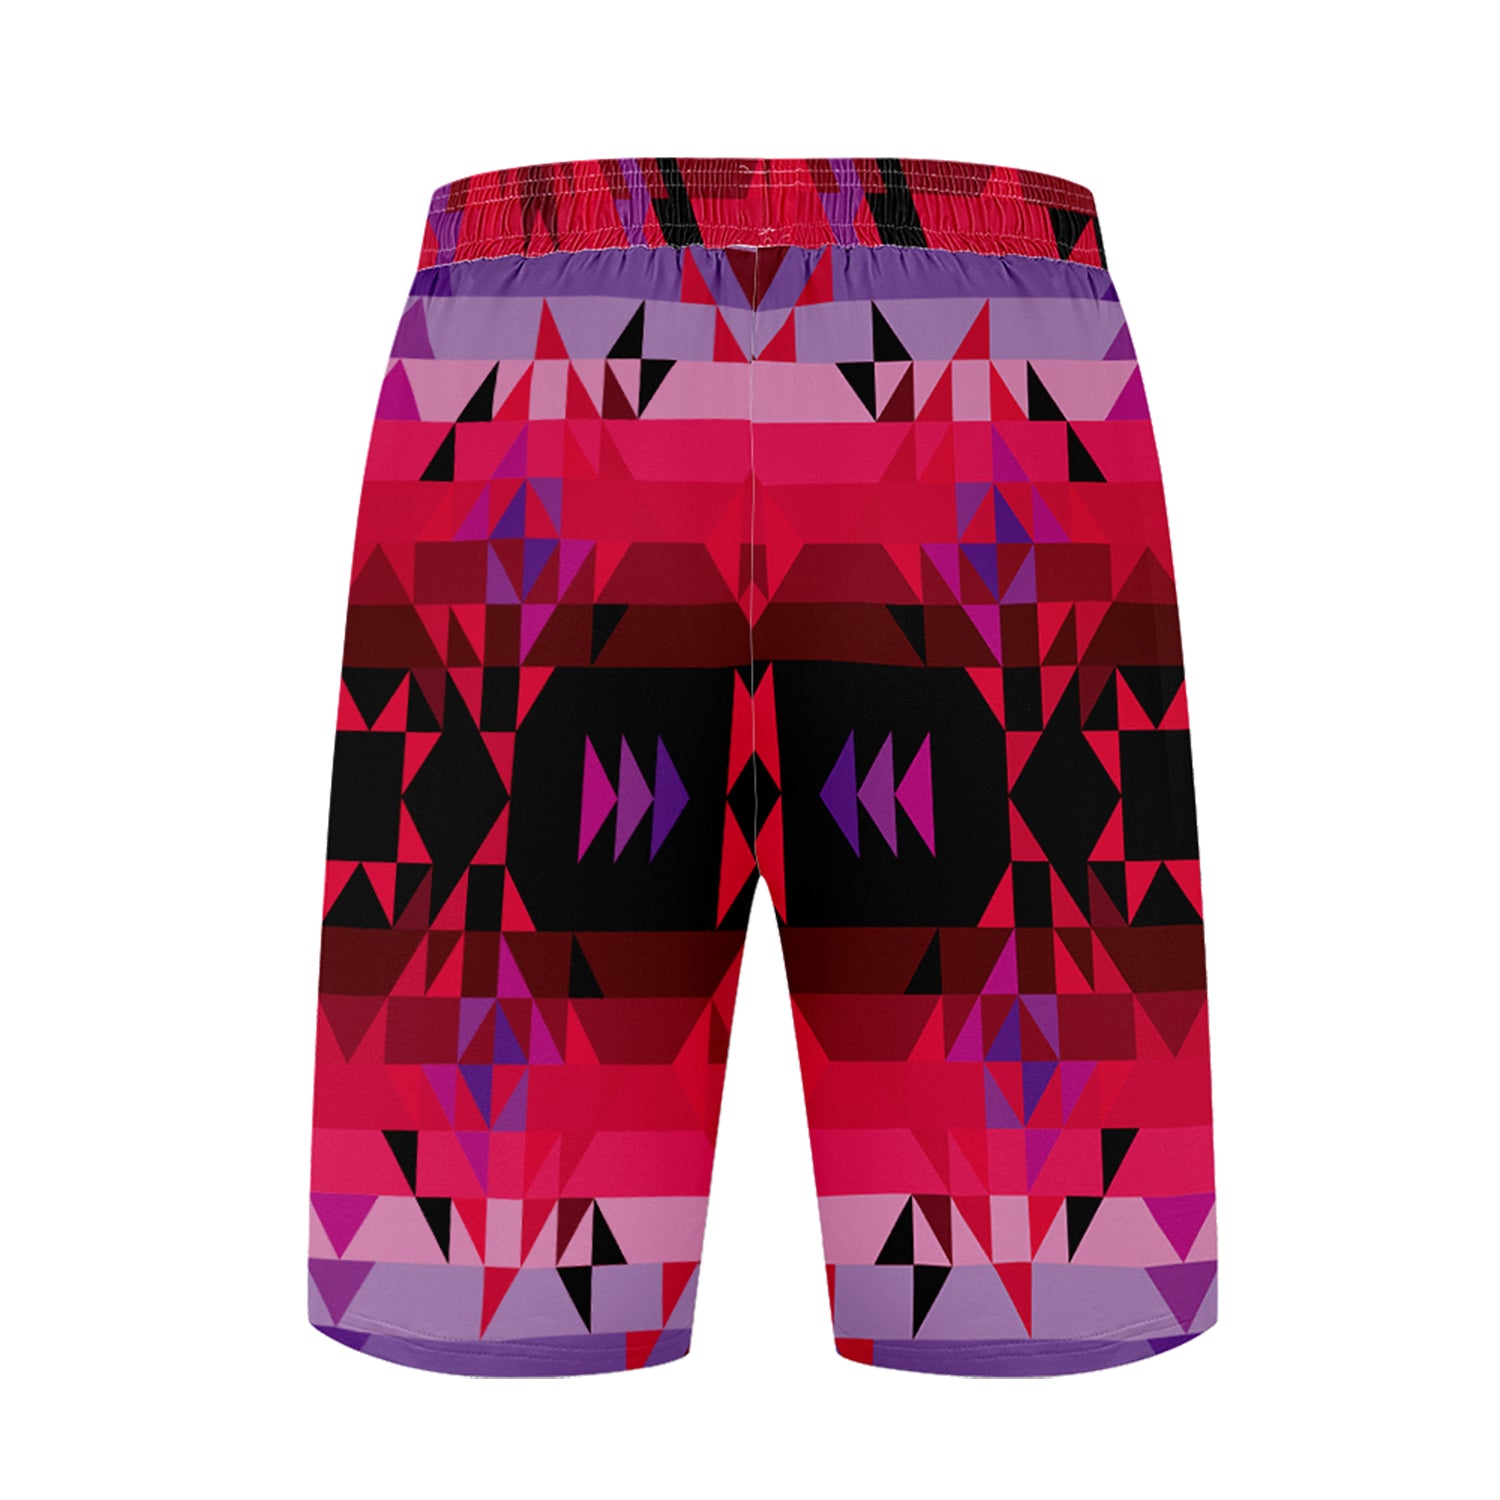 Red Star Athletic Shorts with Pockets